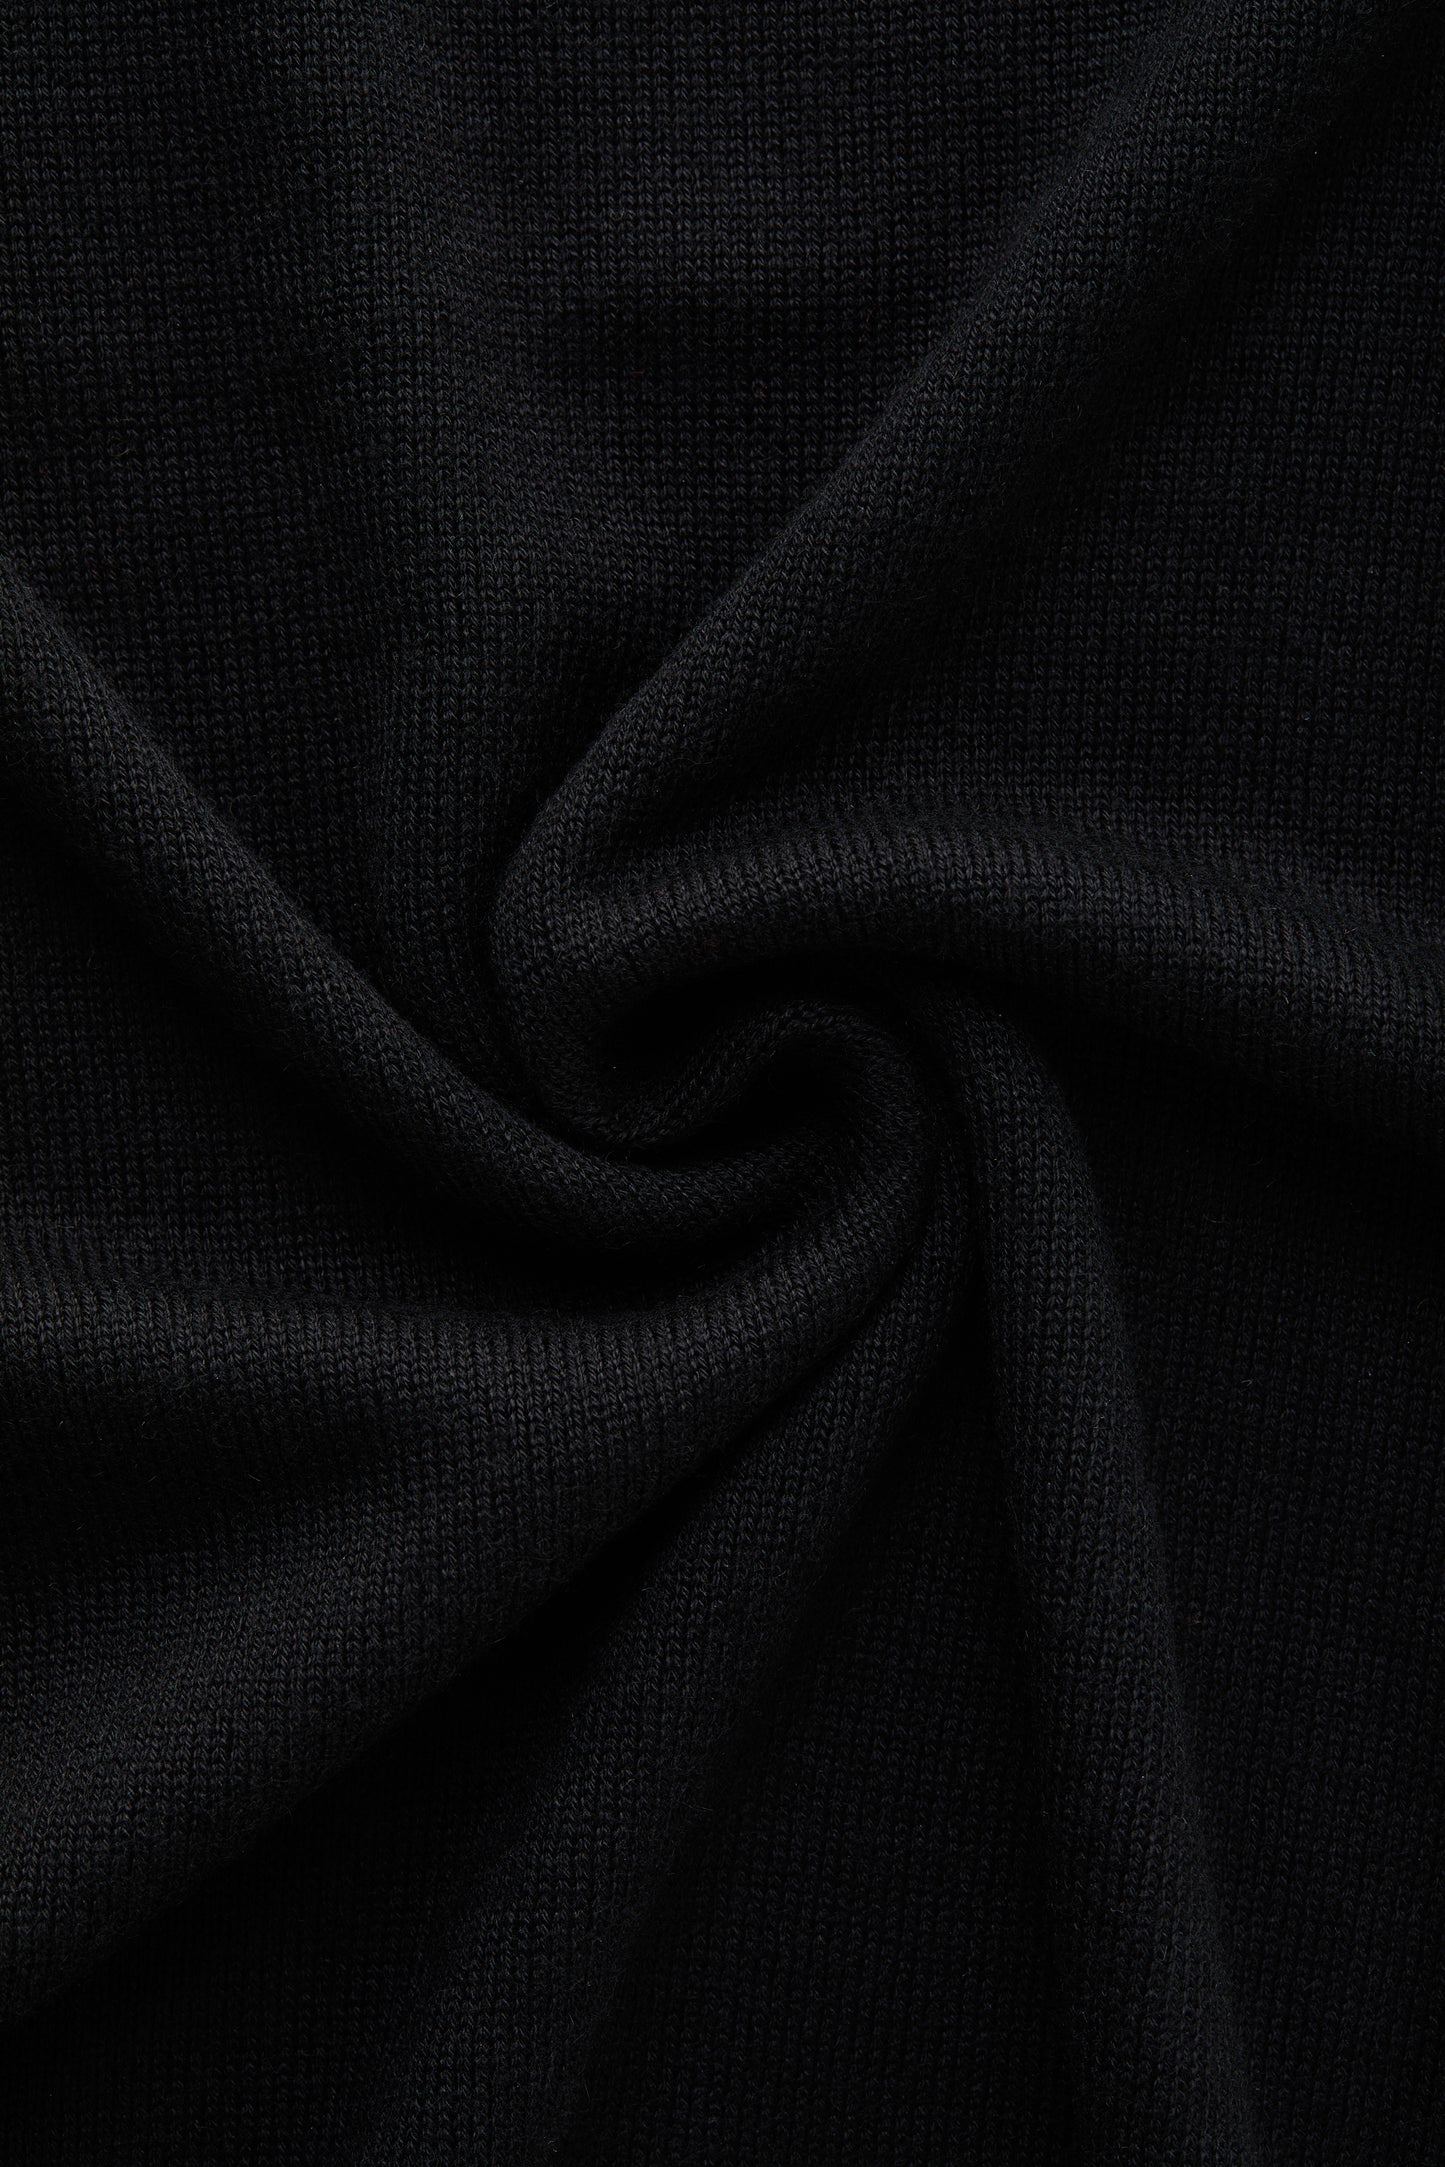 Long Sleeve Bamboo Cashmere Blend Knitted Polo Black